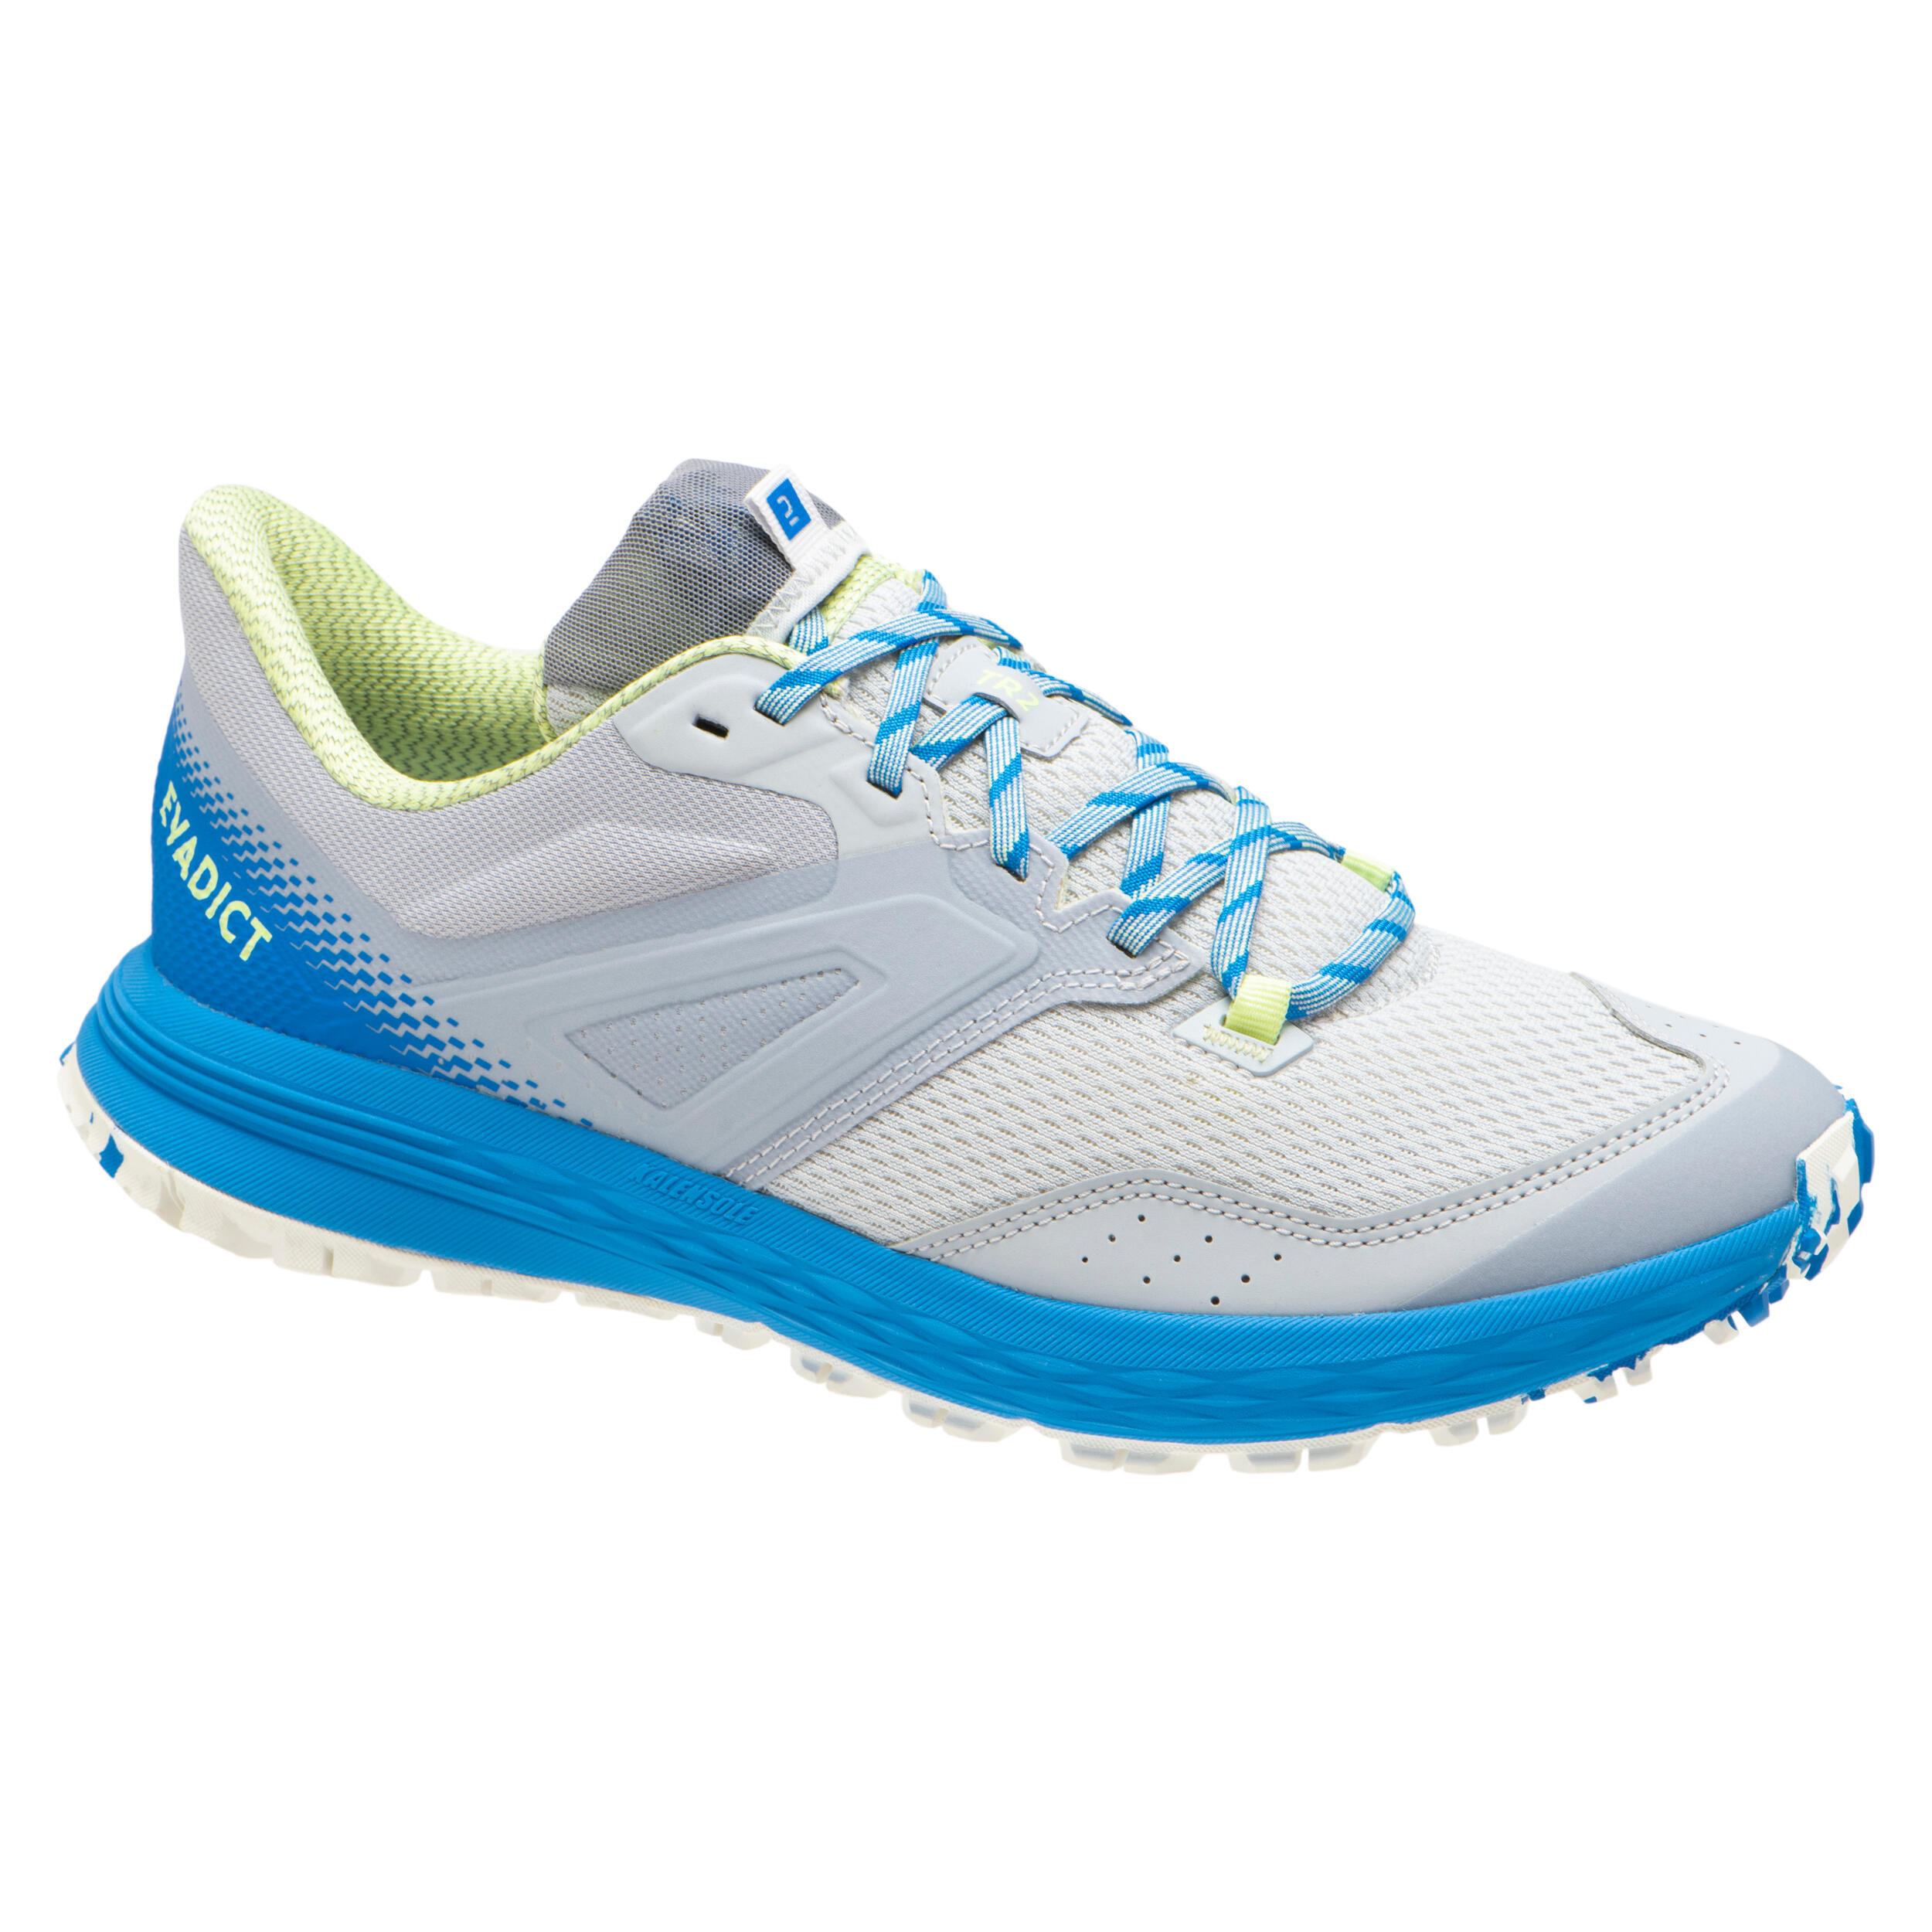 MEN'S TRAIL RUNNING SHOES TR2 - GREY/BLUE 2/10